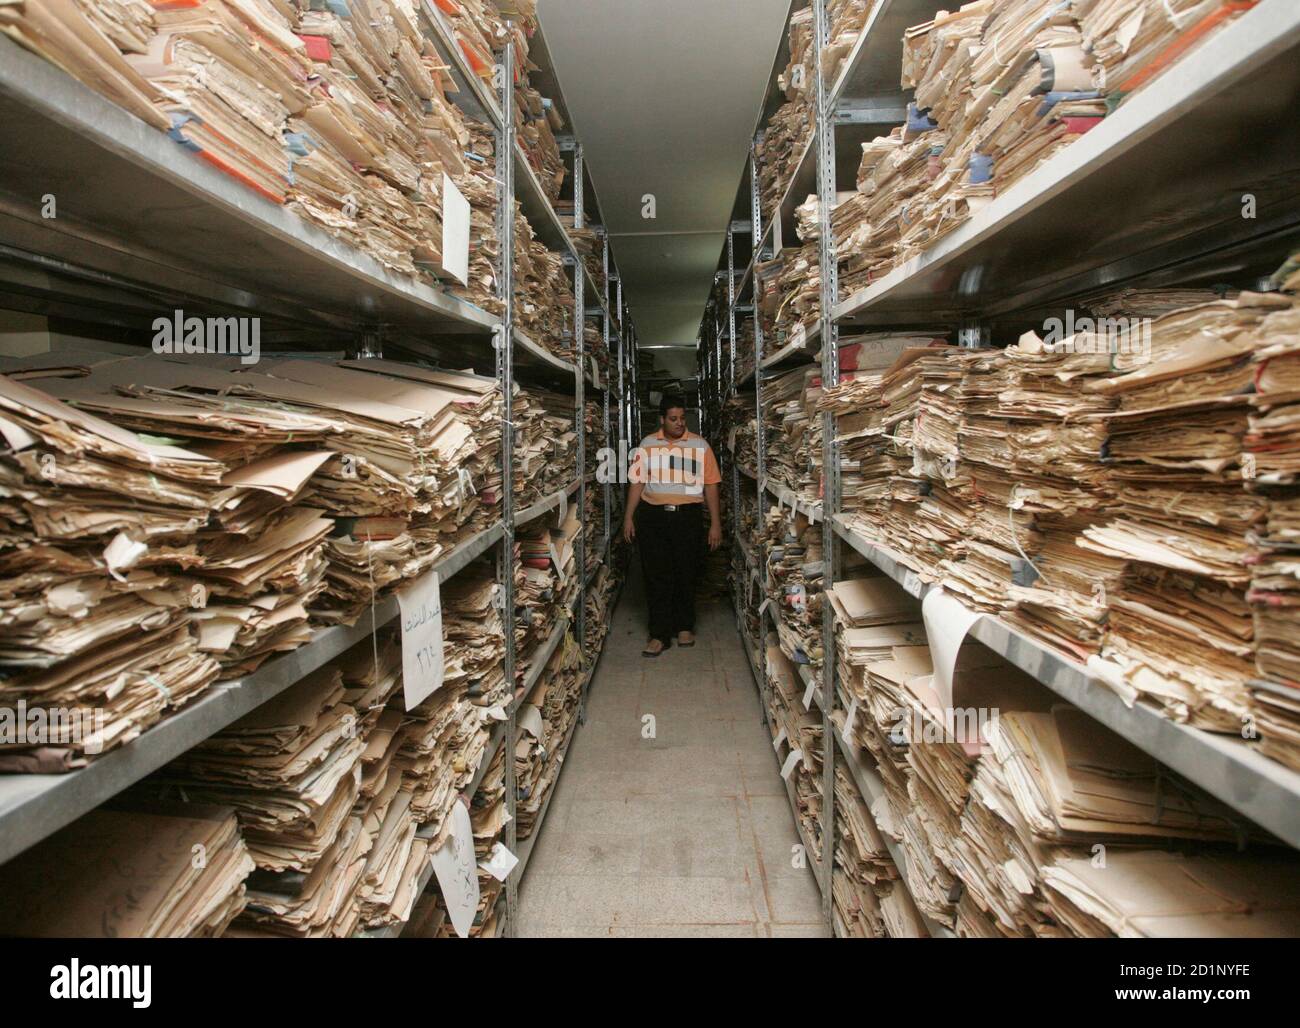 A man walks between the shelves containing historical documents in Iraq's  National library in Baghdad August 12, 2007. Saad Eskander, Director of the  National Library and Archive said on Saturday he feared